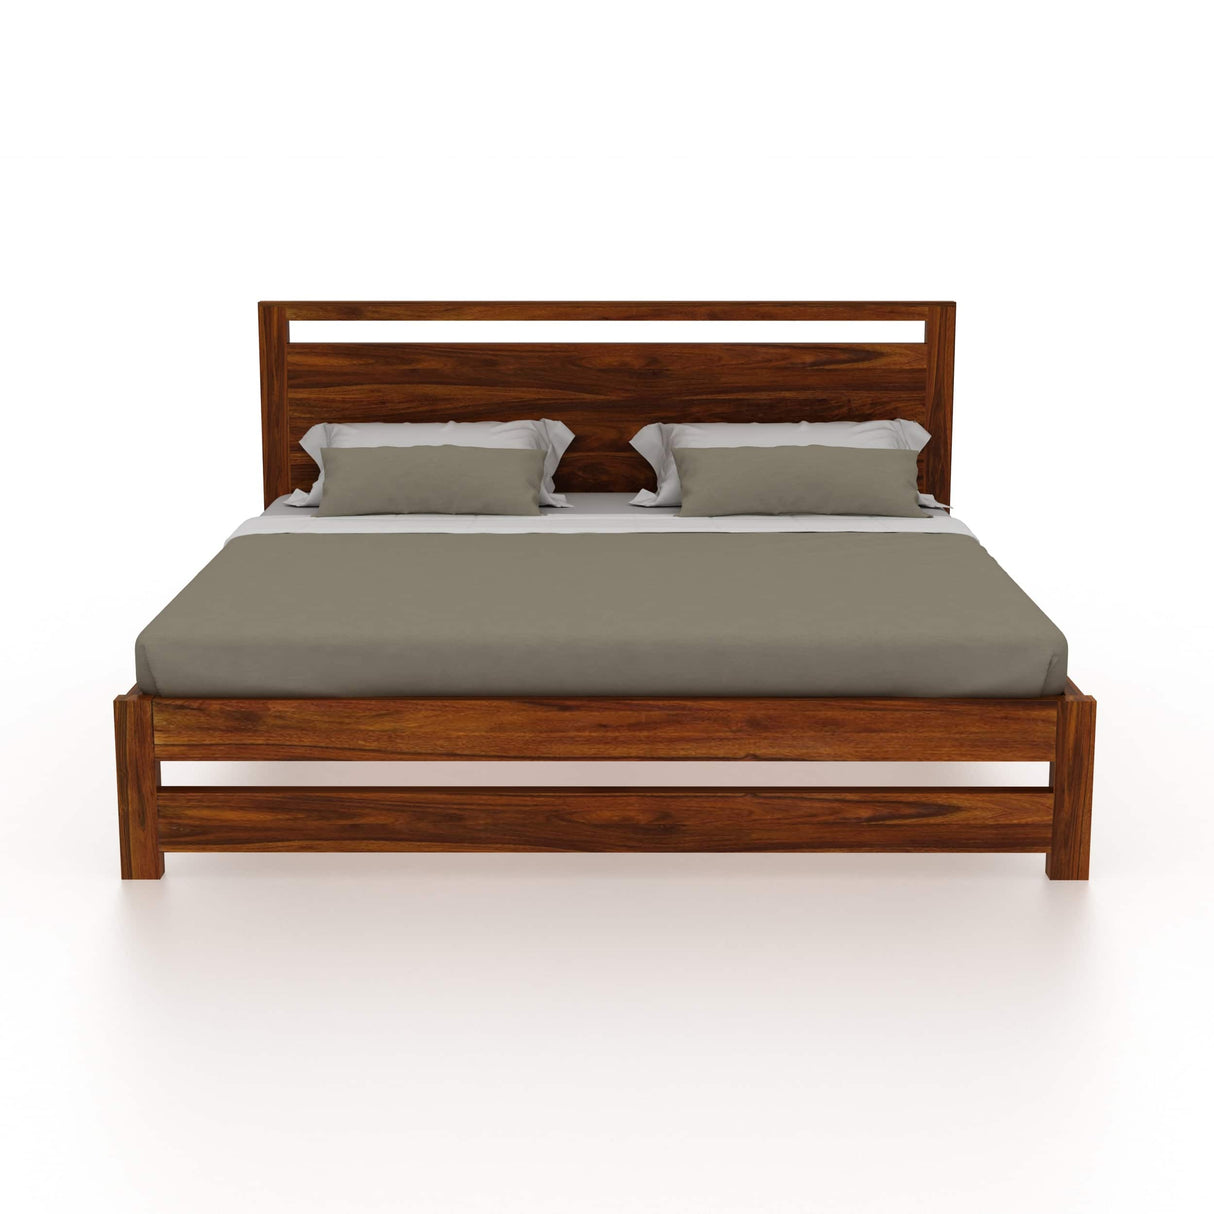 Jaipur Solid Wood Bed Without Storage - 1 Year Warranty